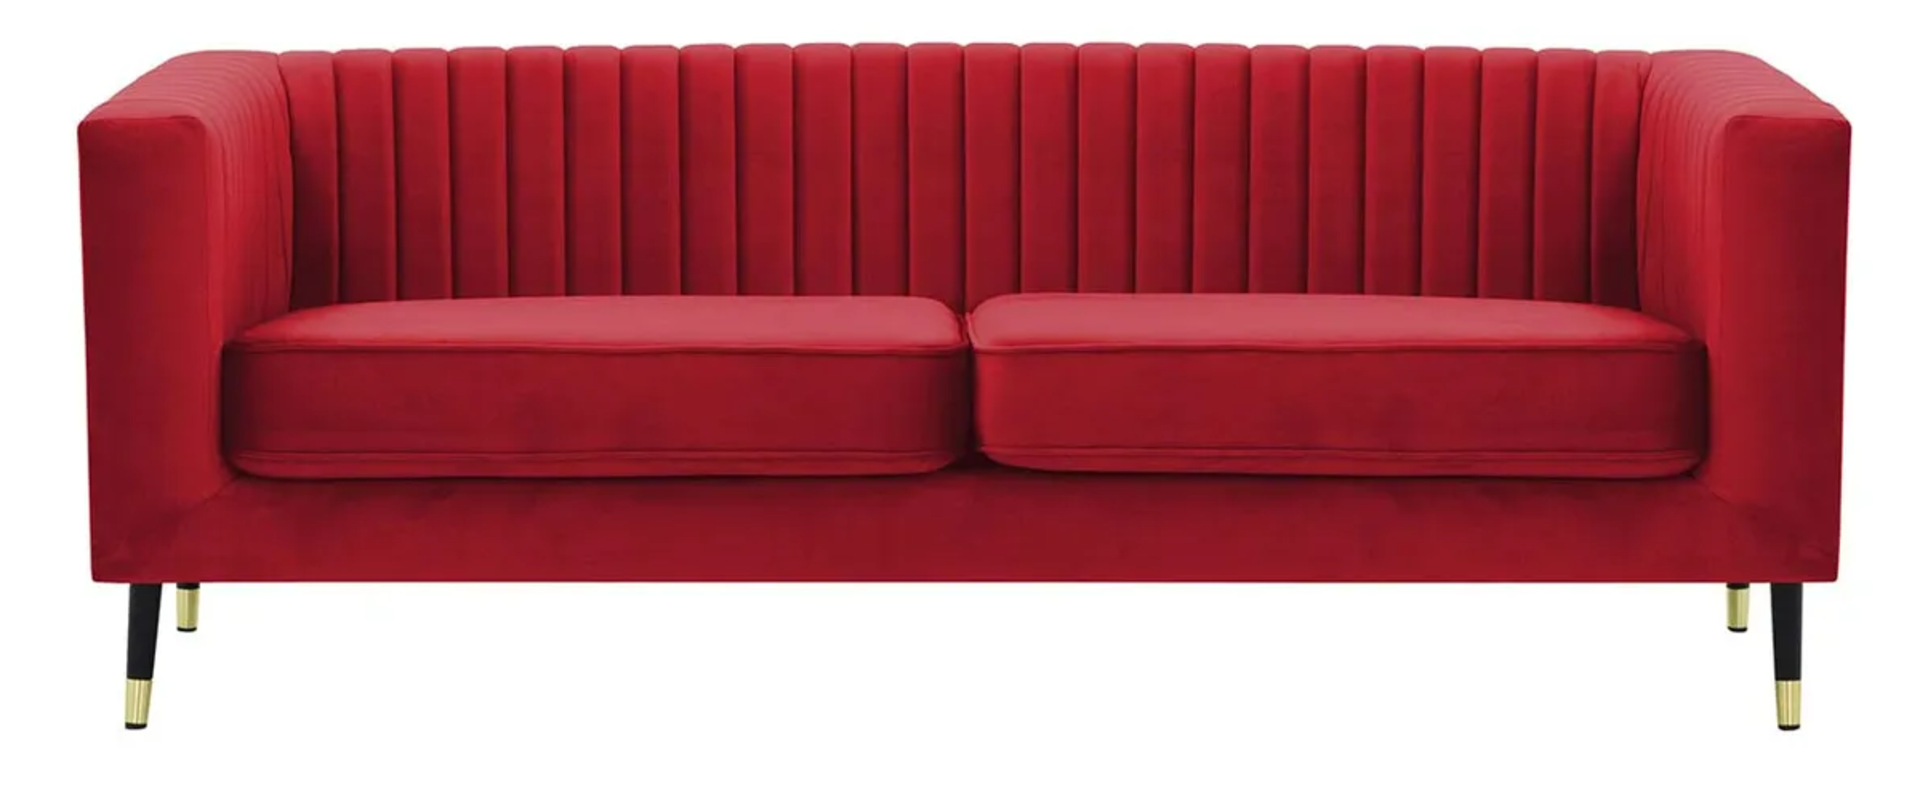 New & Packaged Slender 3 Seater Sofa. RRP £548. People associate sofas with rest and relaxation.